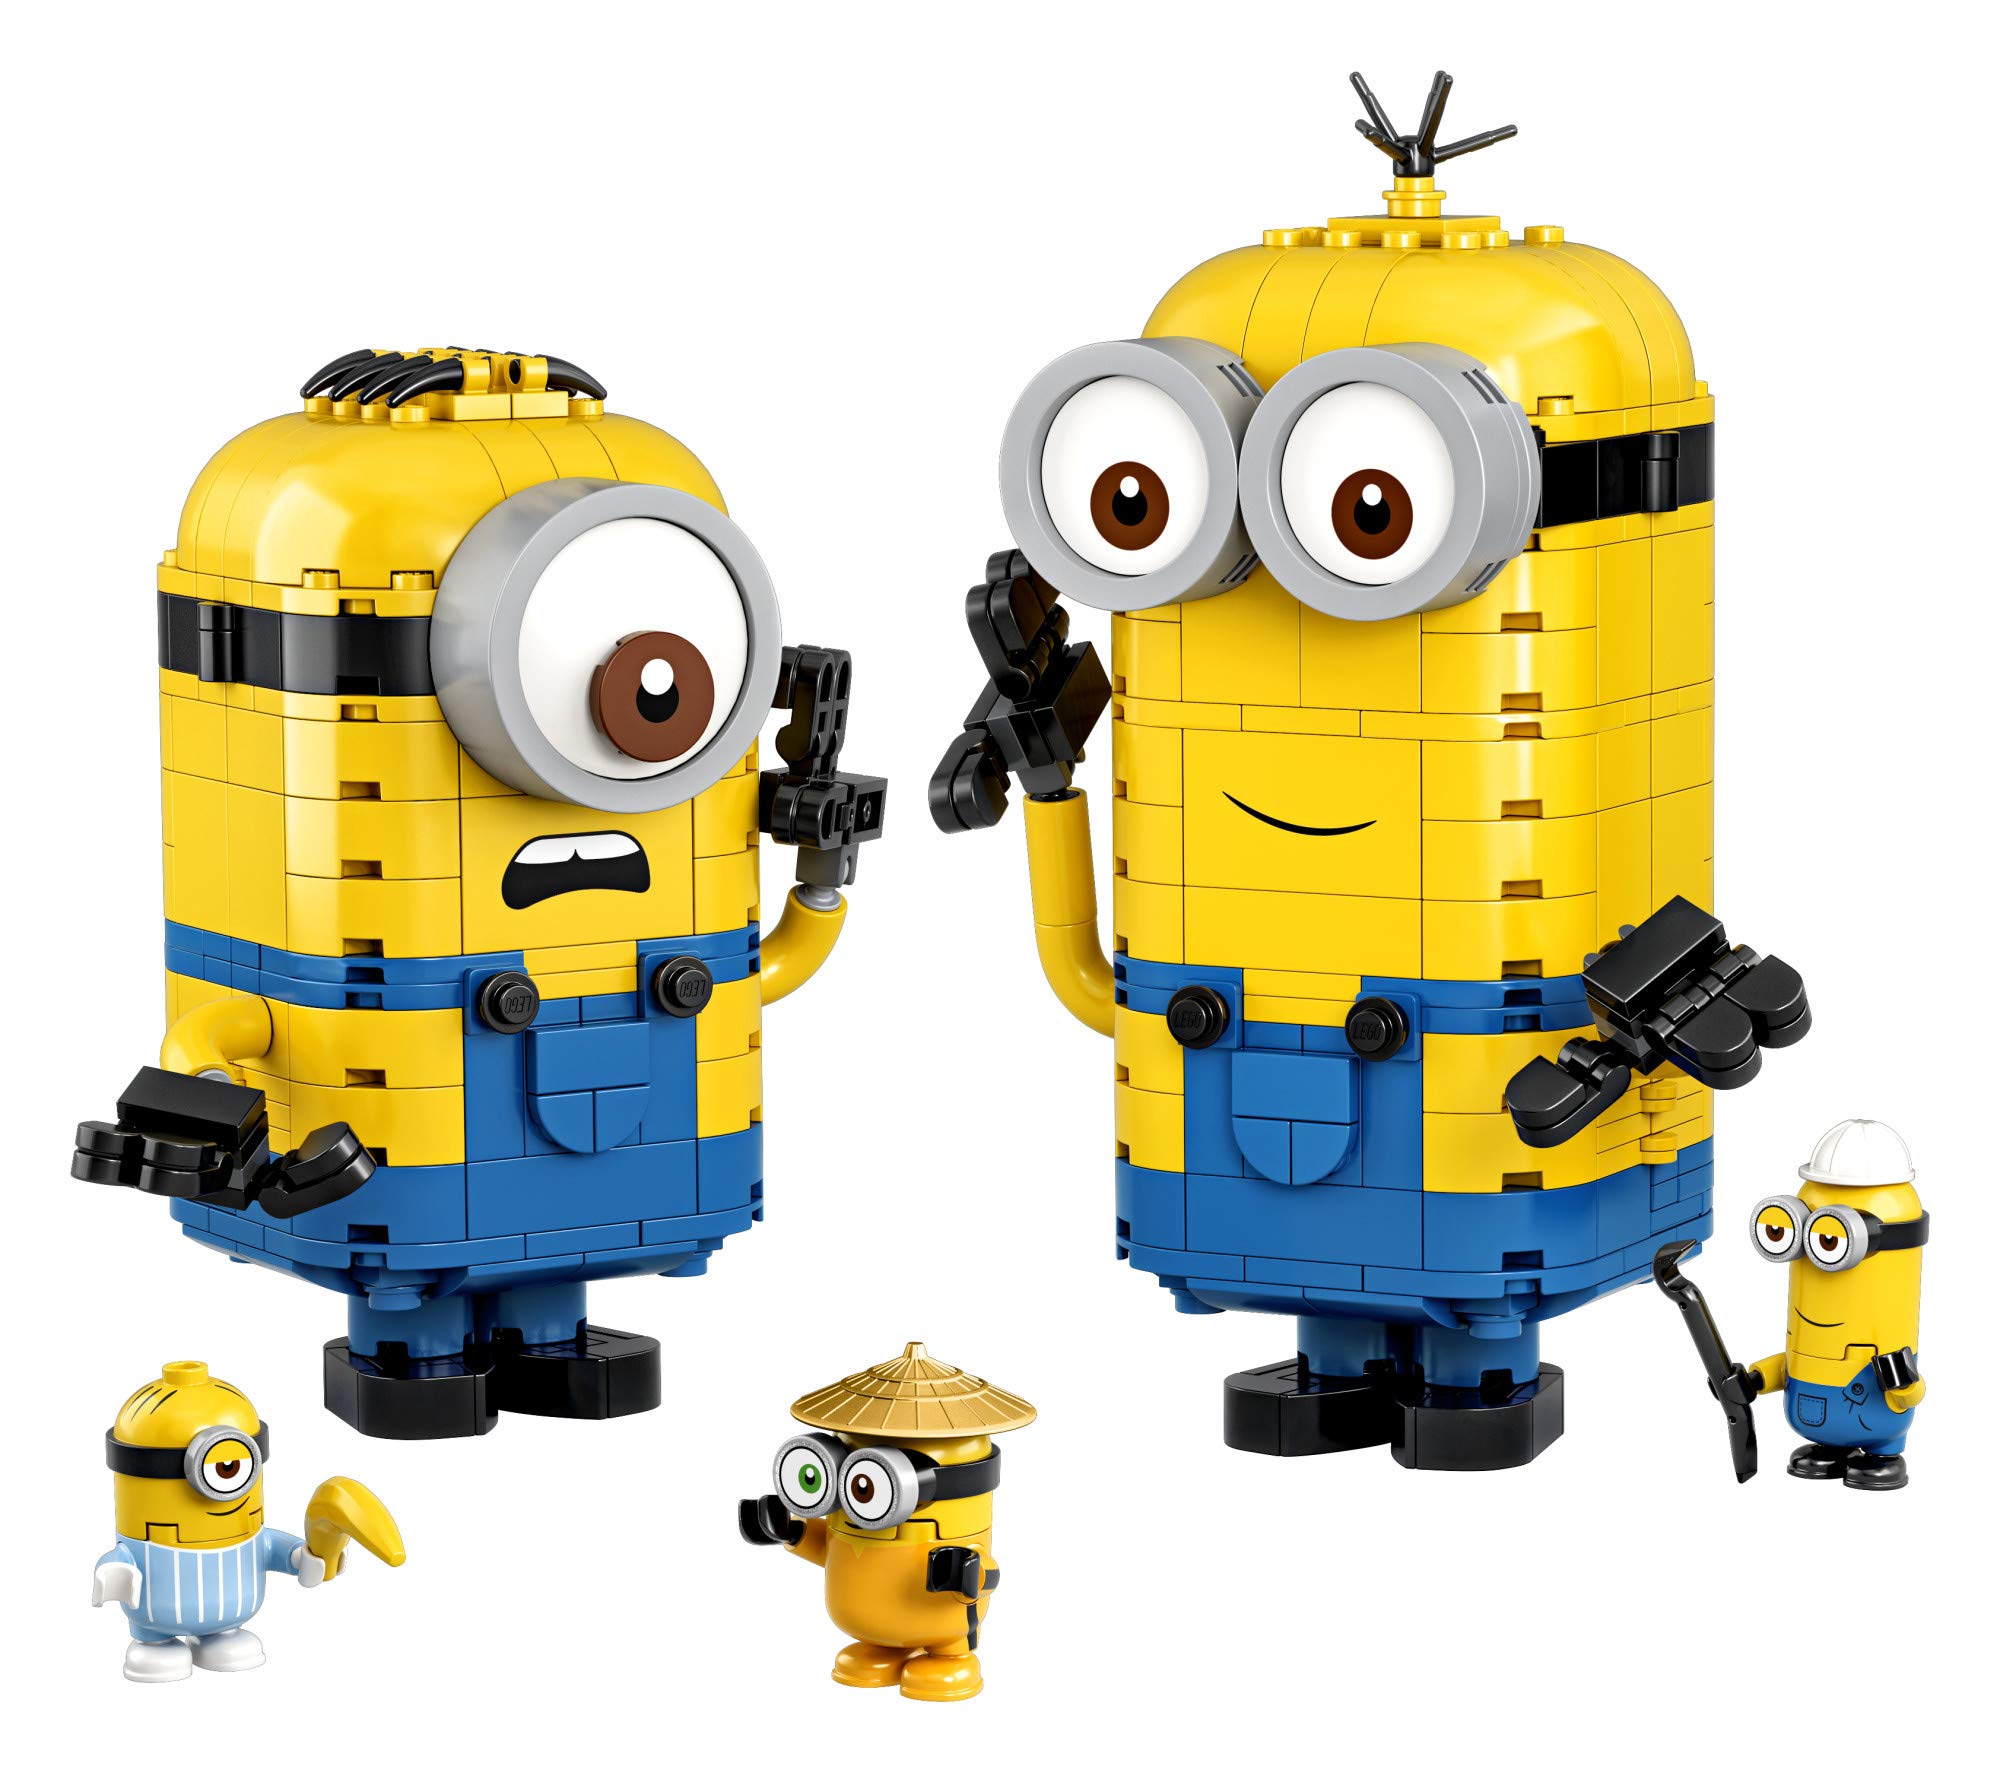 LEGO Minions: The Rise of Gru: Brick-Built Minions and Their Lair (75551) Building Set for Kids, Great Birthday Present for Kids Who Love Minions, Kevin, Bob and Stuart (876 Pieces)